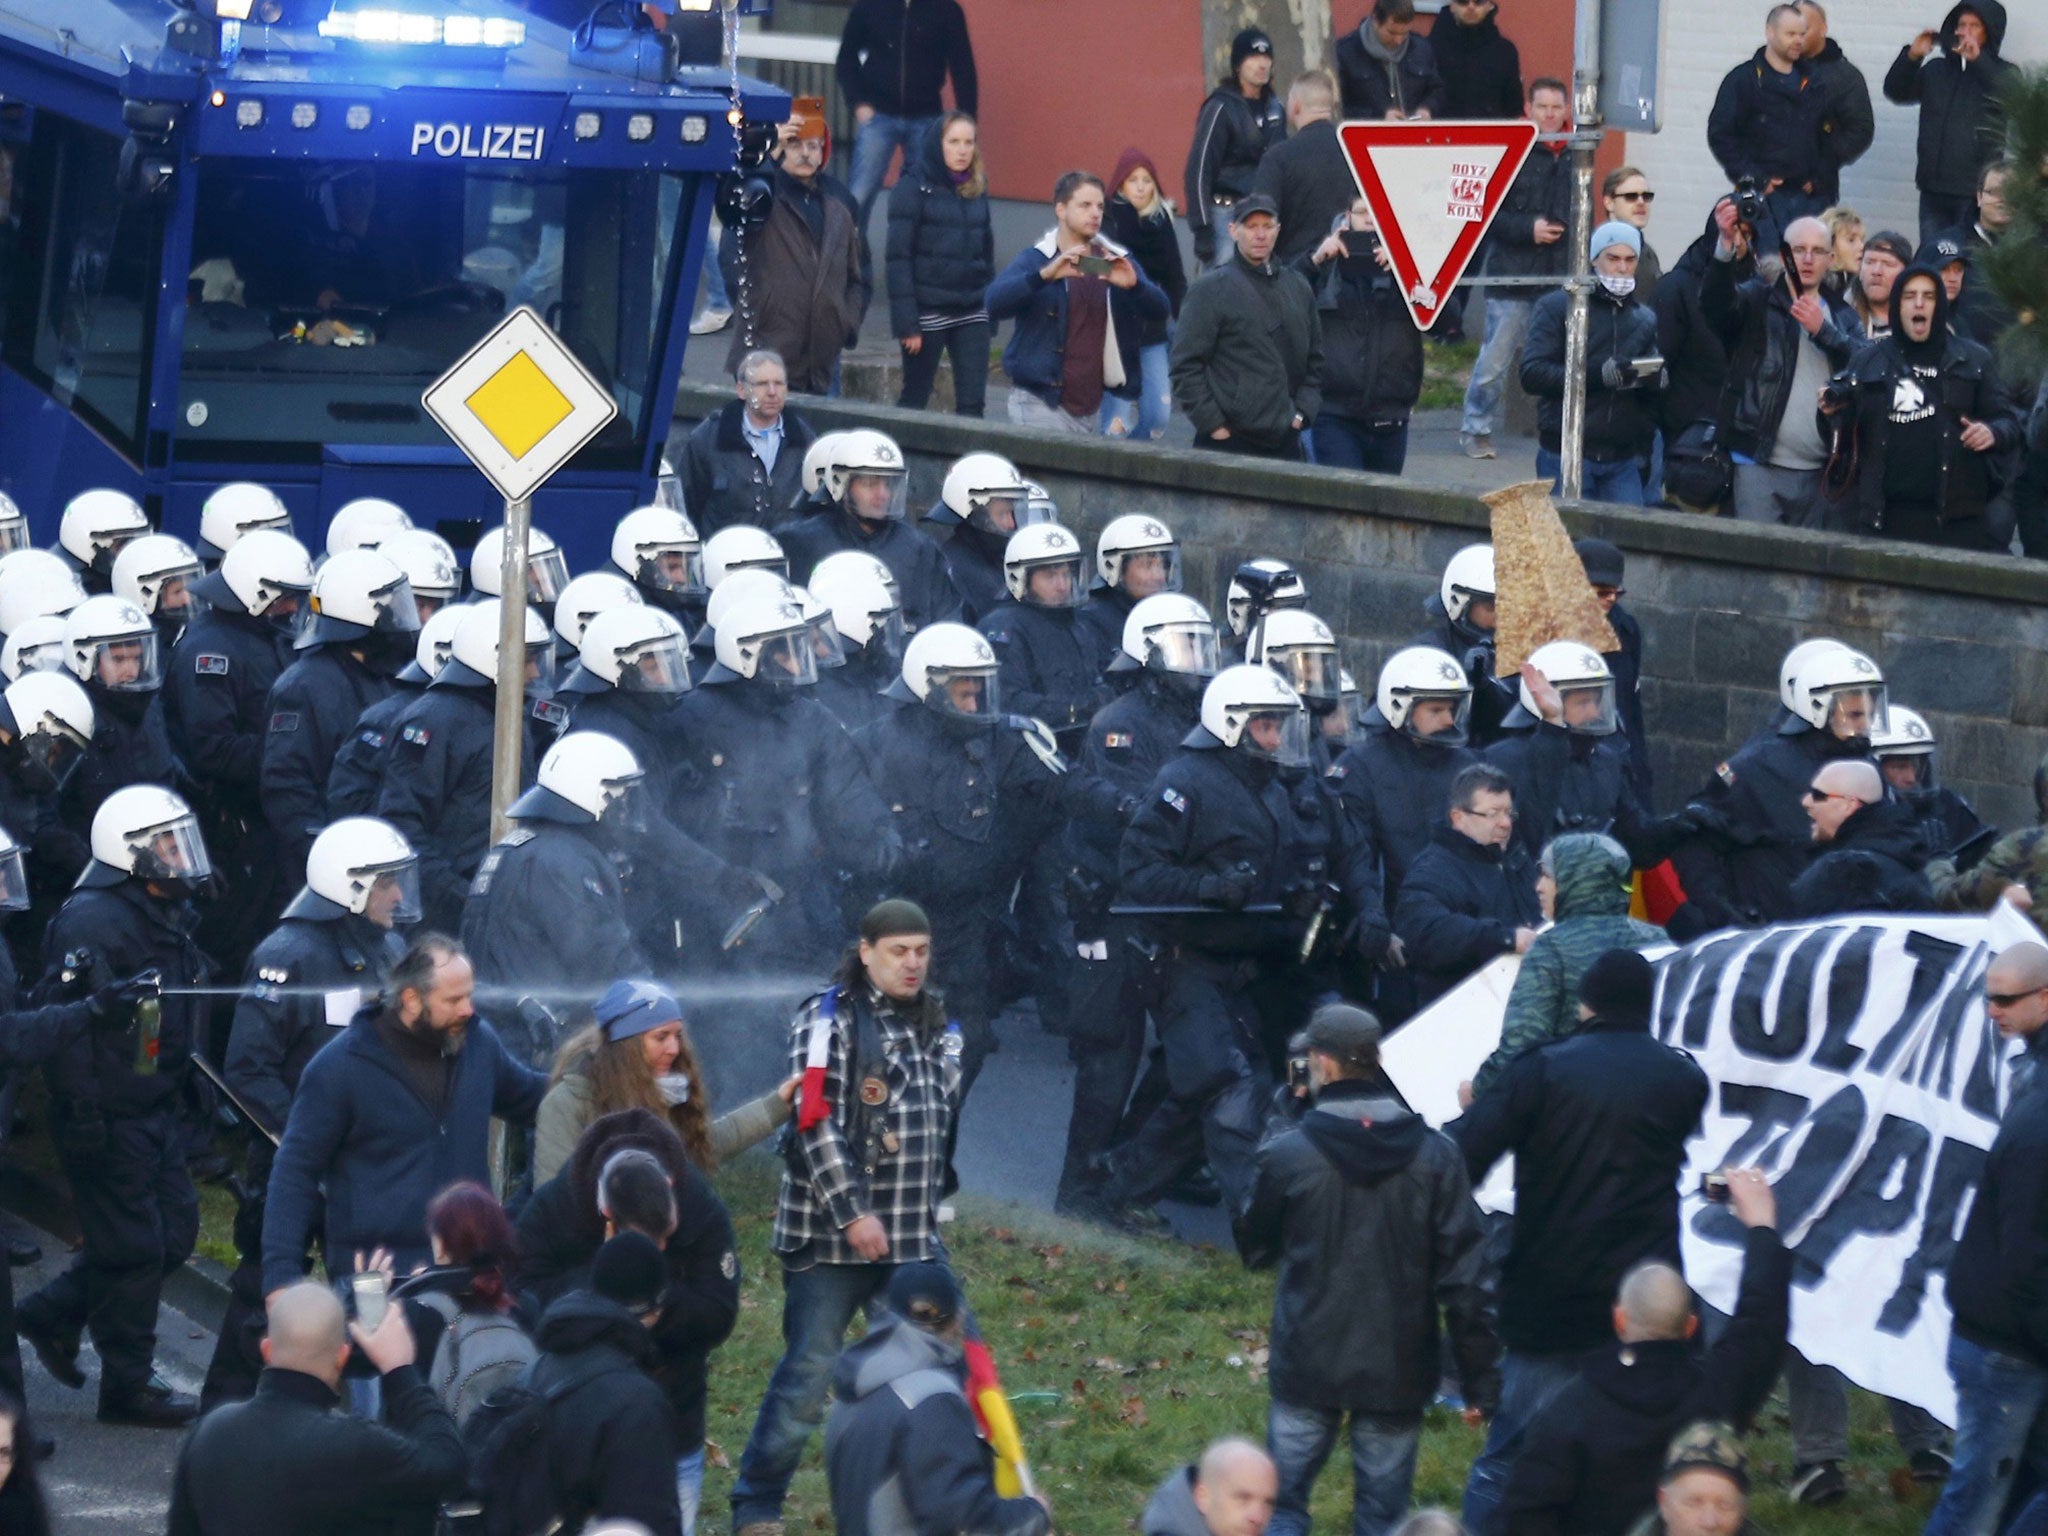 Previous political rallies have seen police and protesters clash in Cologne